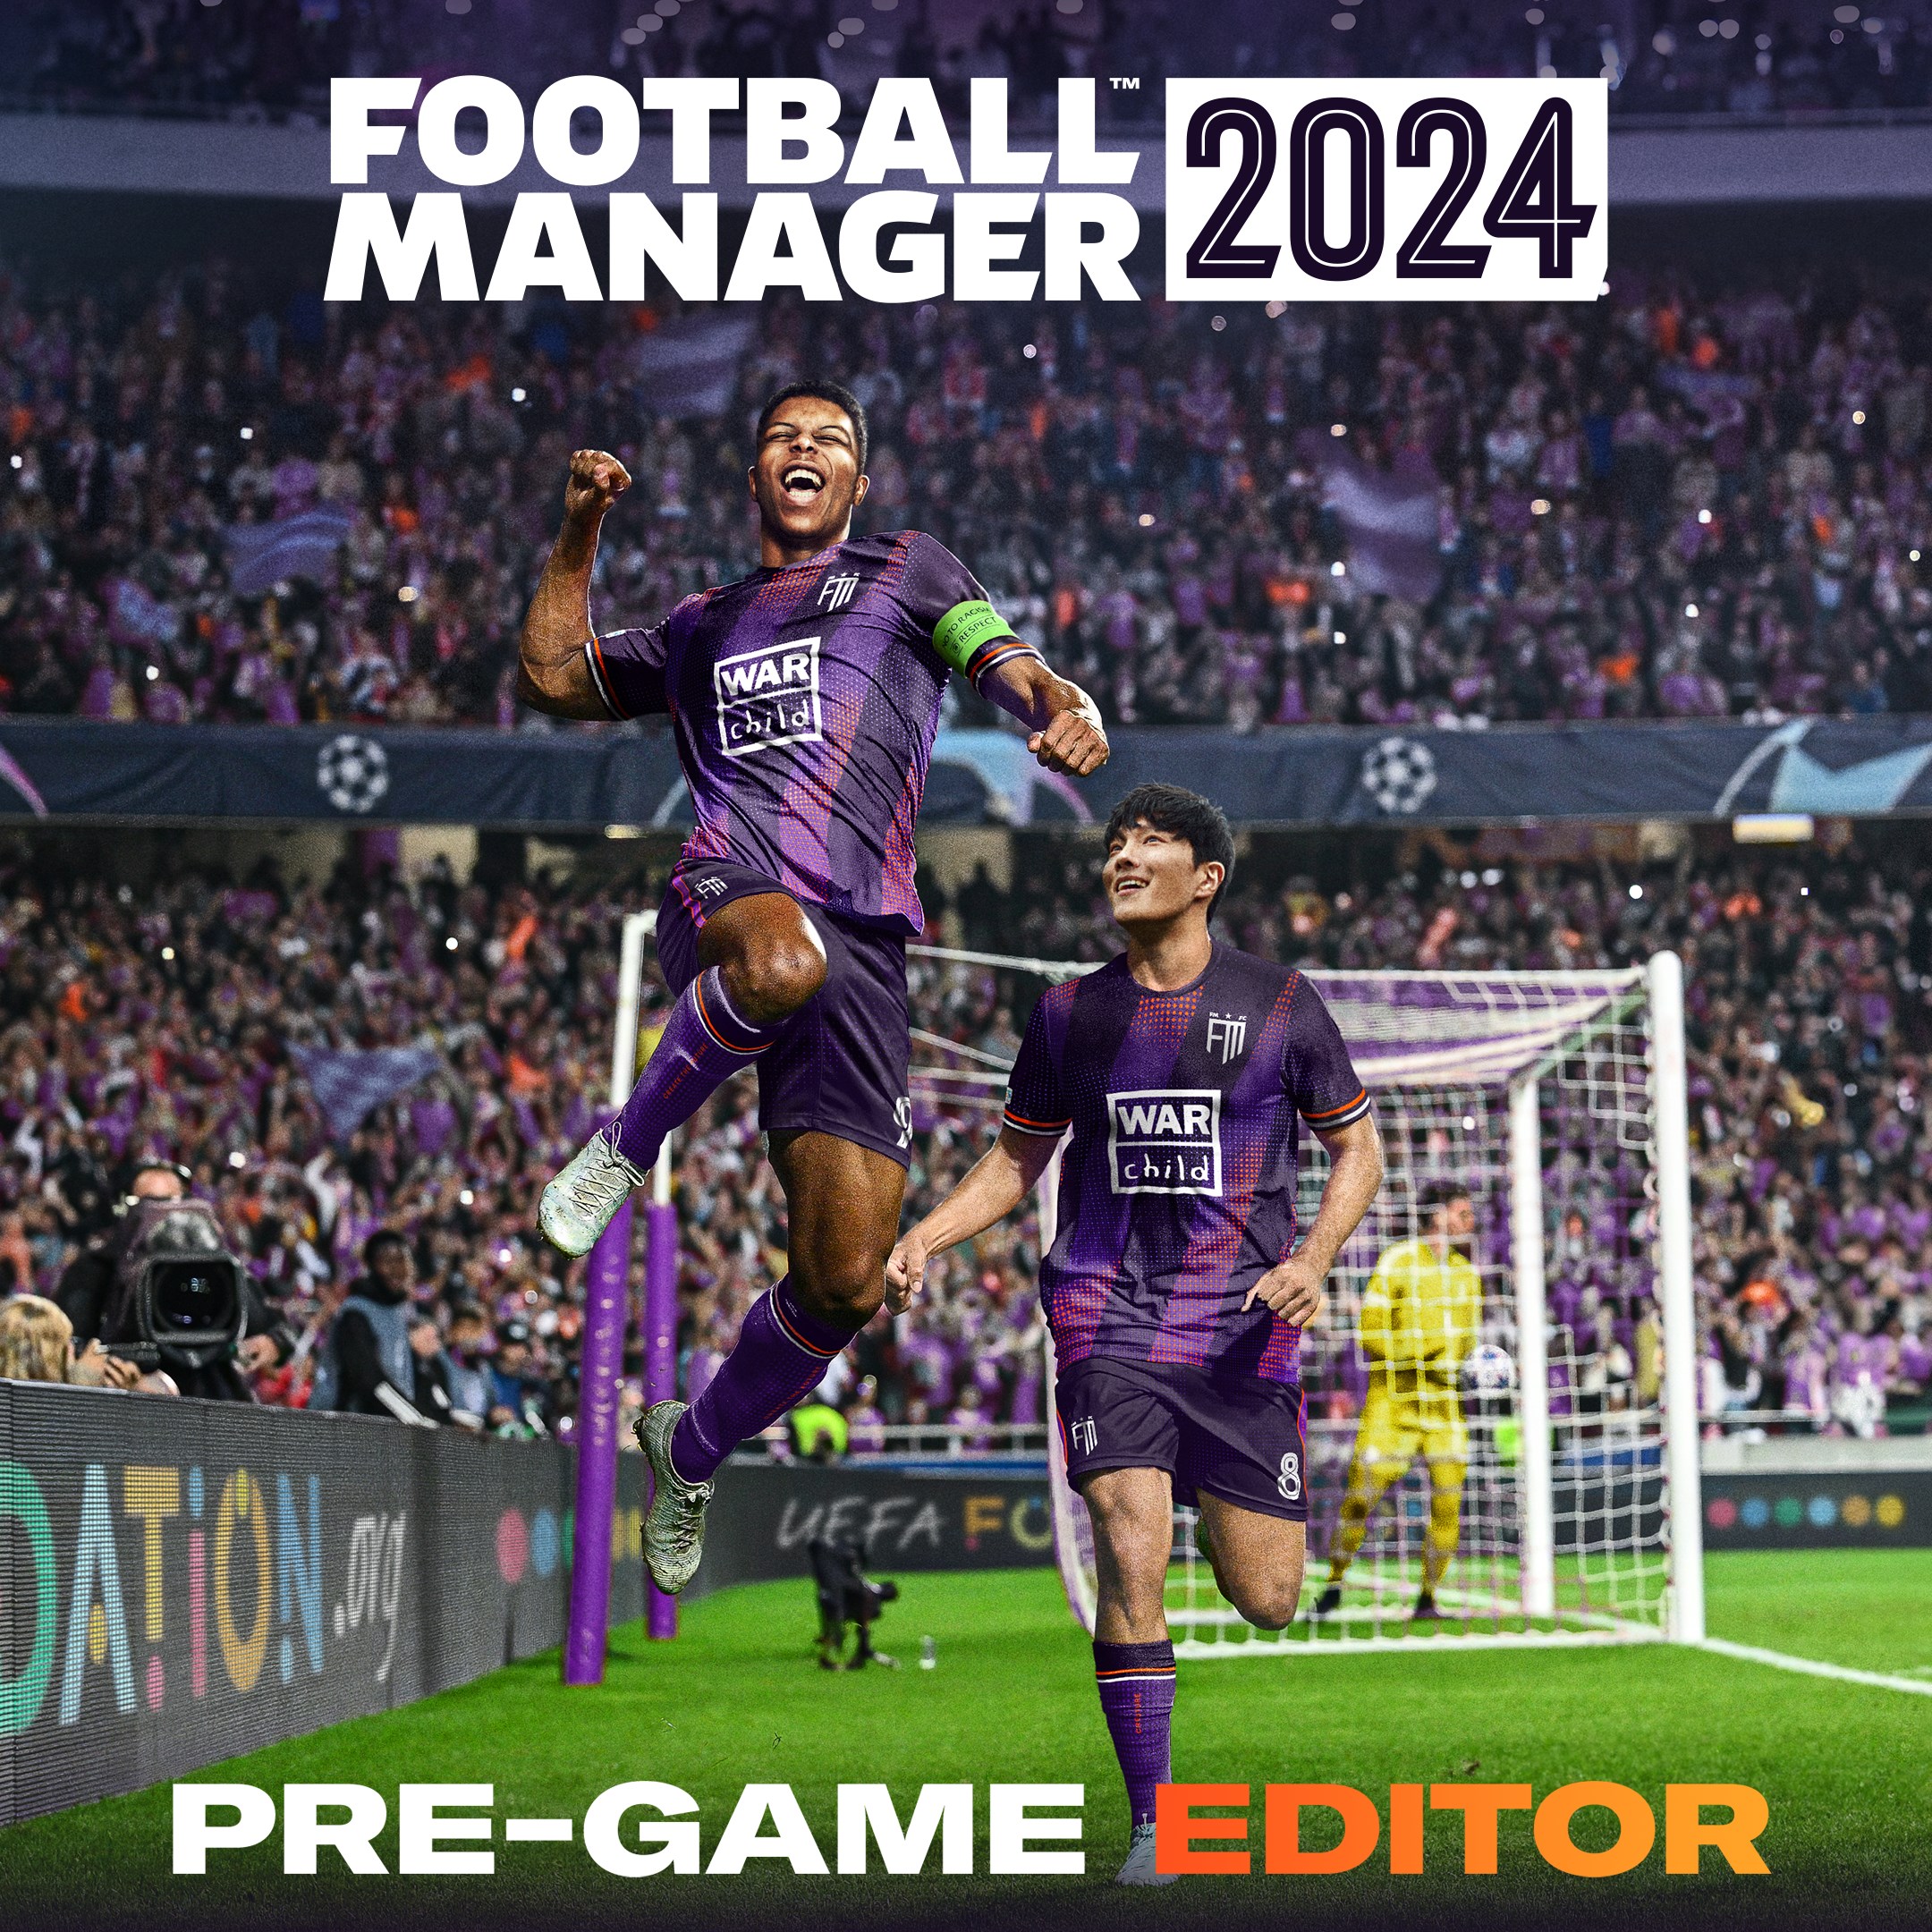 Football Manager 2024 PreGame Editor Official app in the Microsoft Store